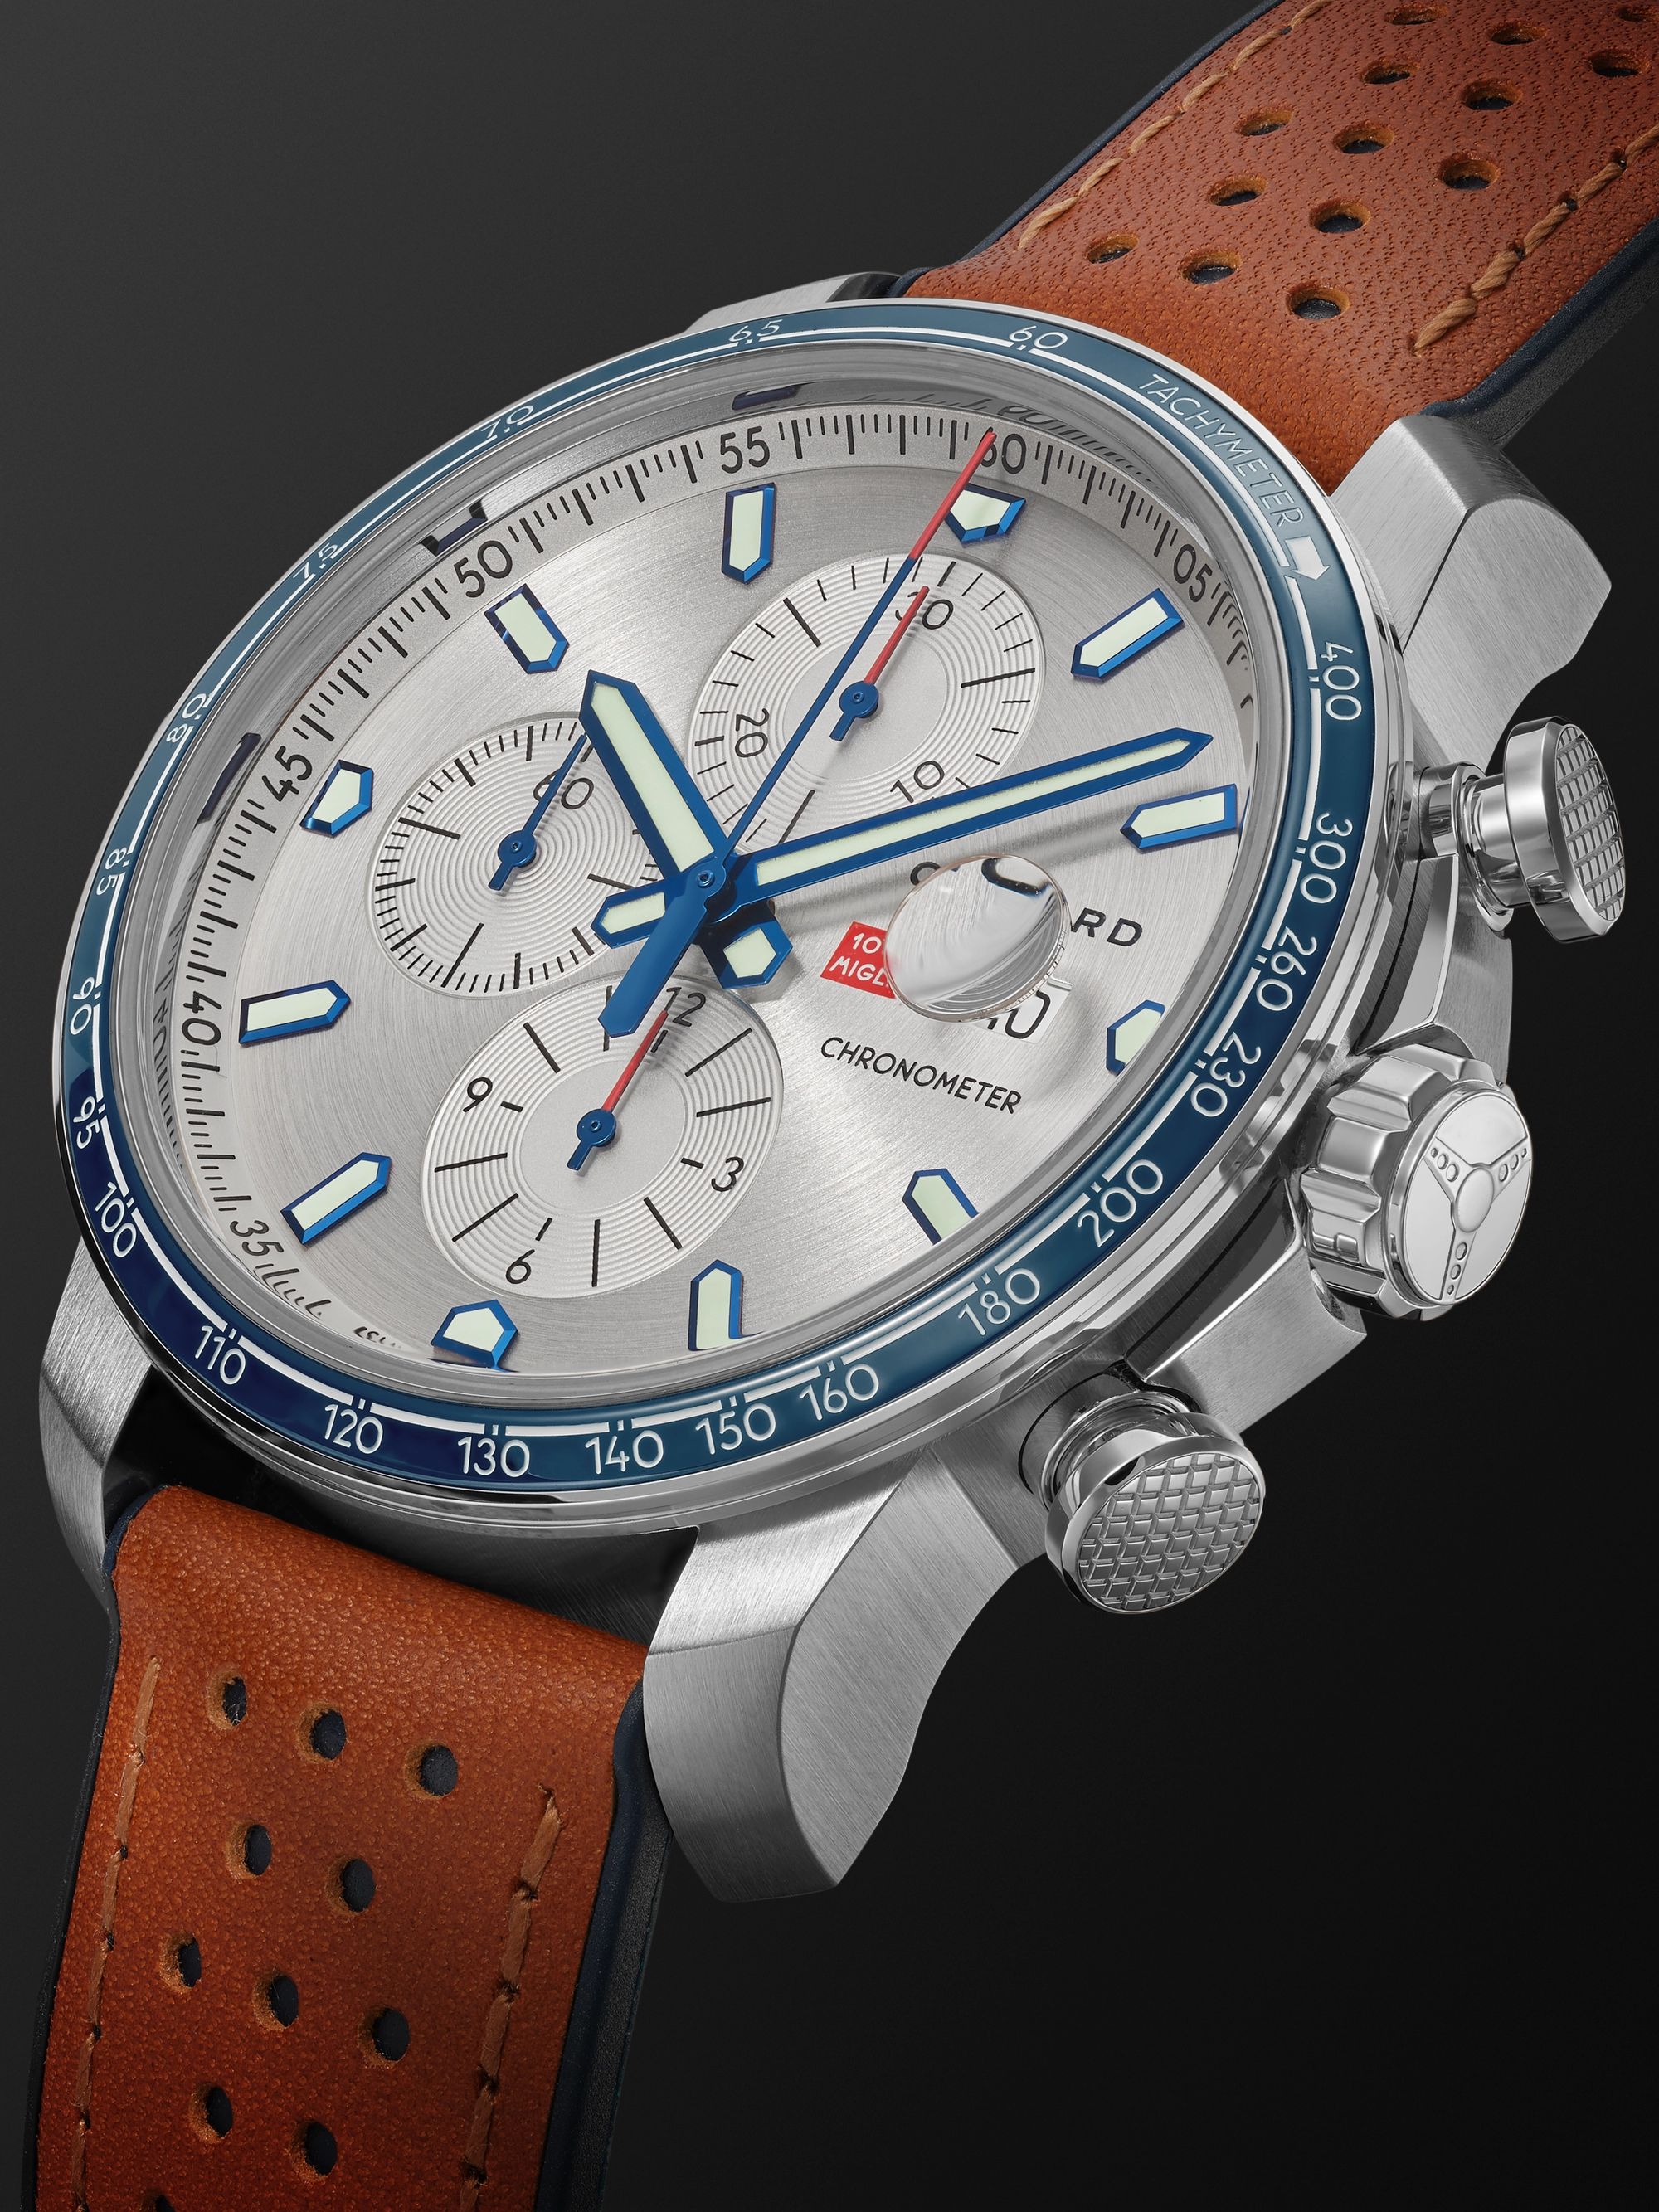 CHOPARD Mille Miglia GTS Limited Edition Automatic Chronograph 44mm Stainless Steel and Leather Watch, Ref. No. 168571-3010